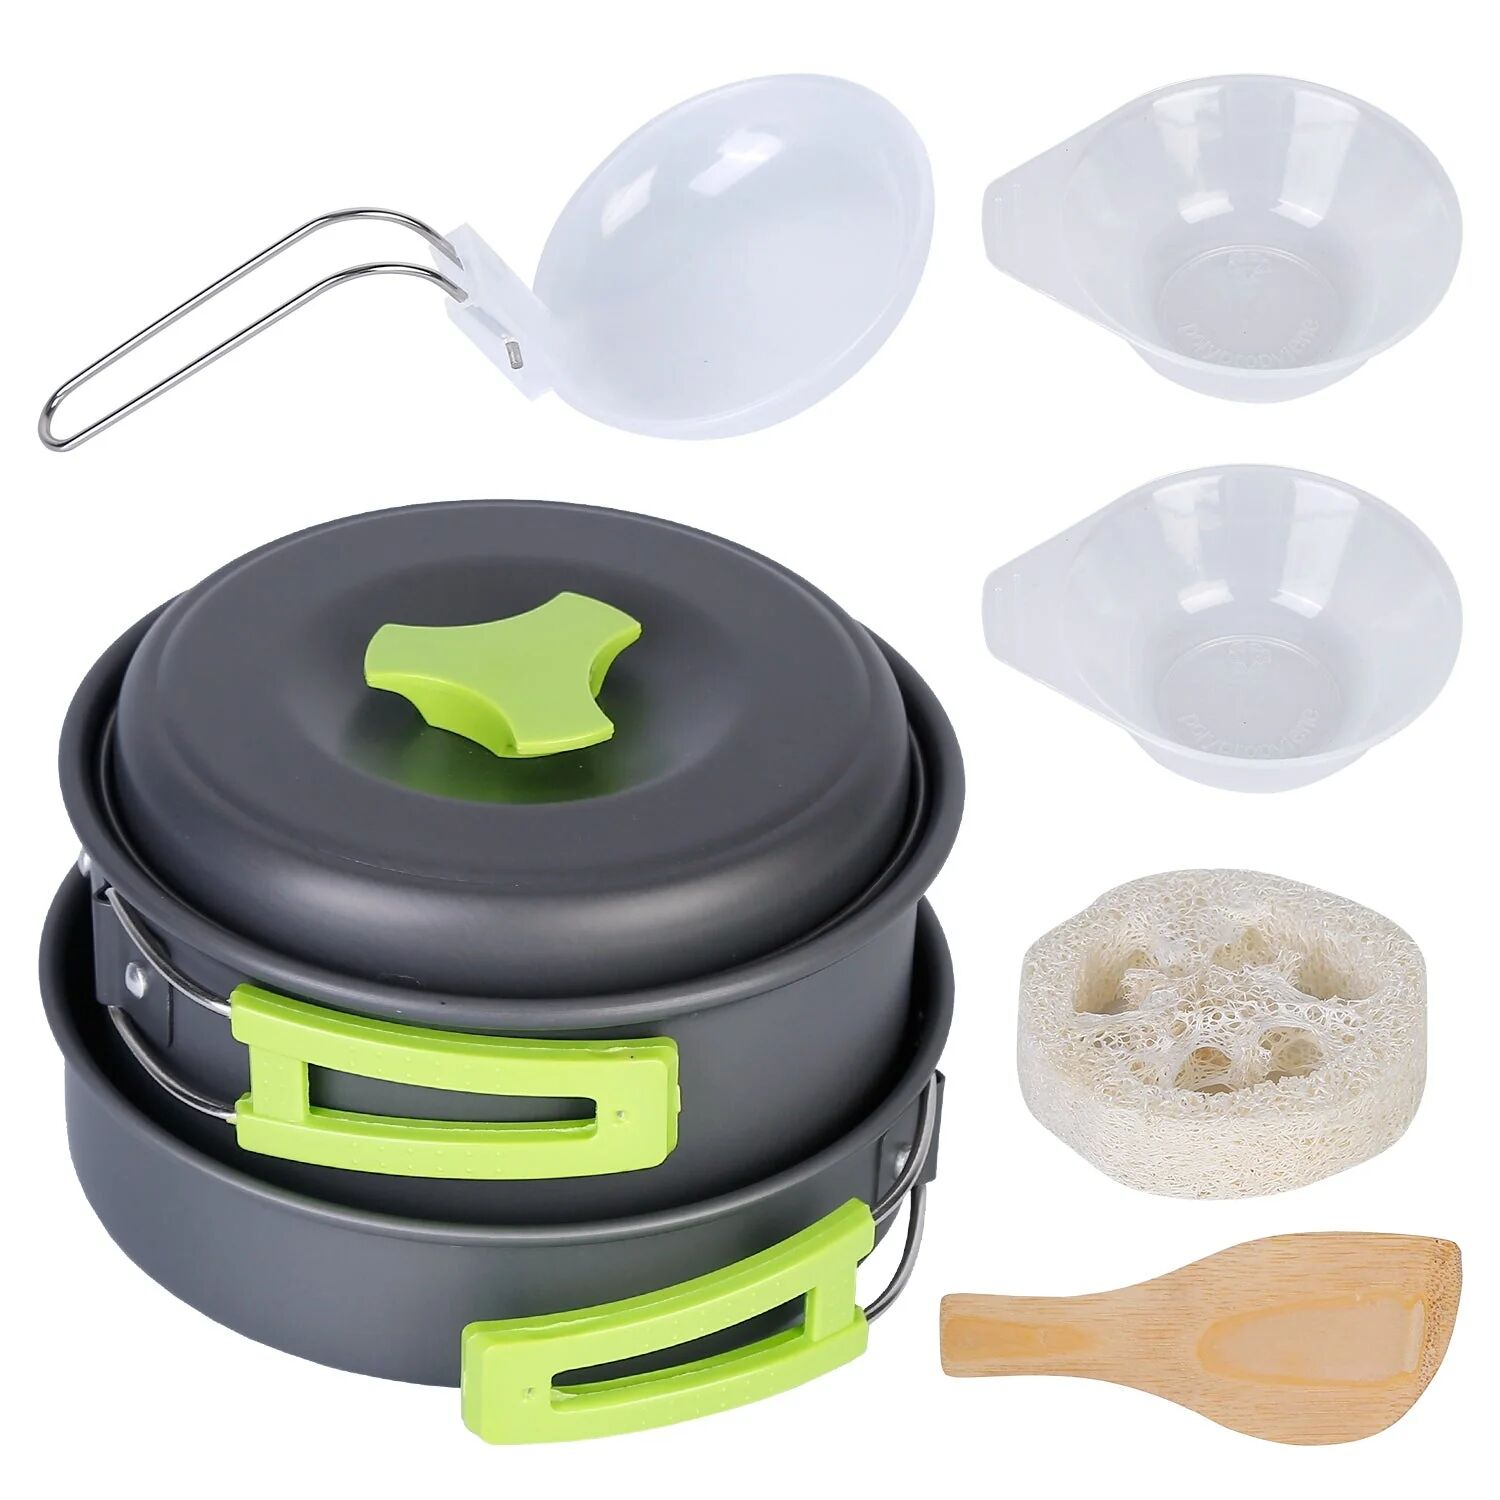 DailySale 9-Piece: Camping Cookware Set